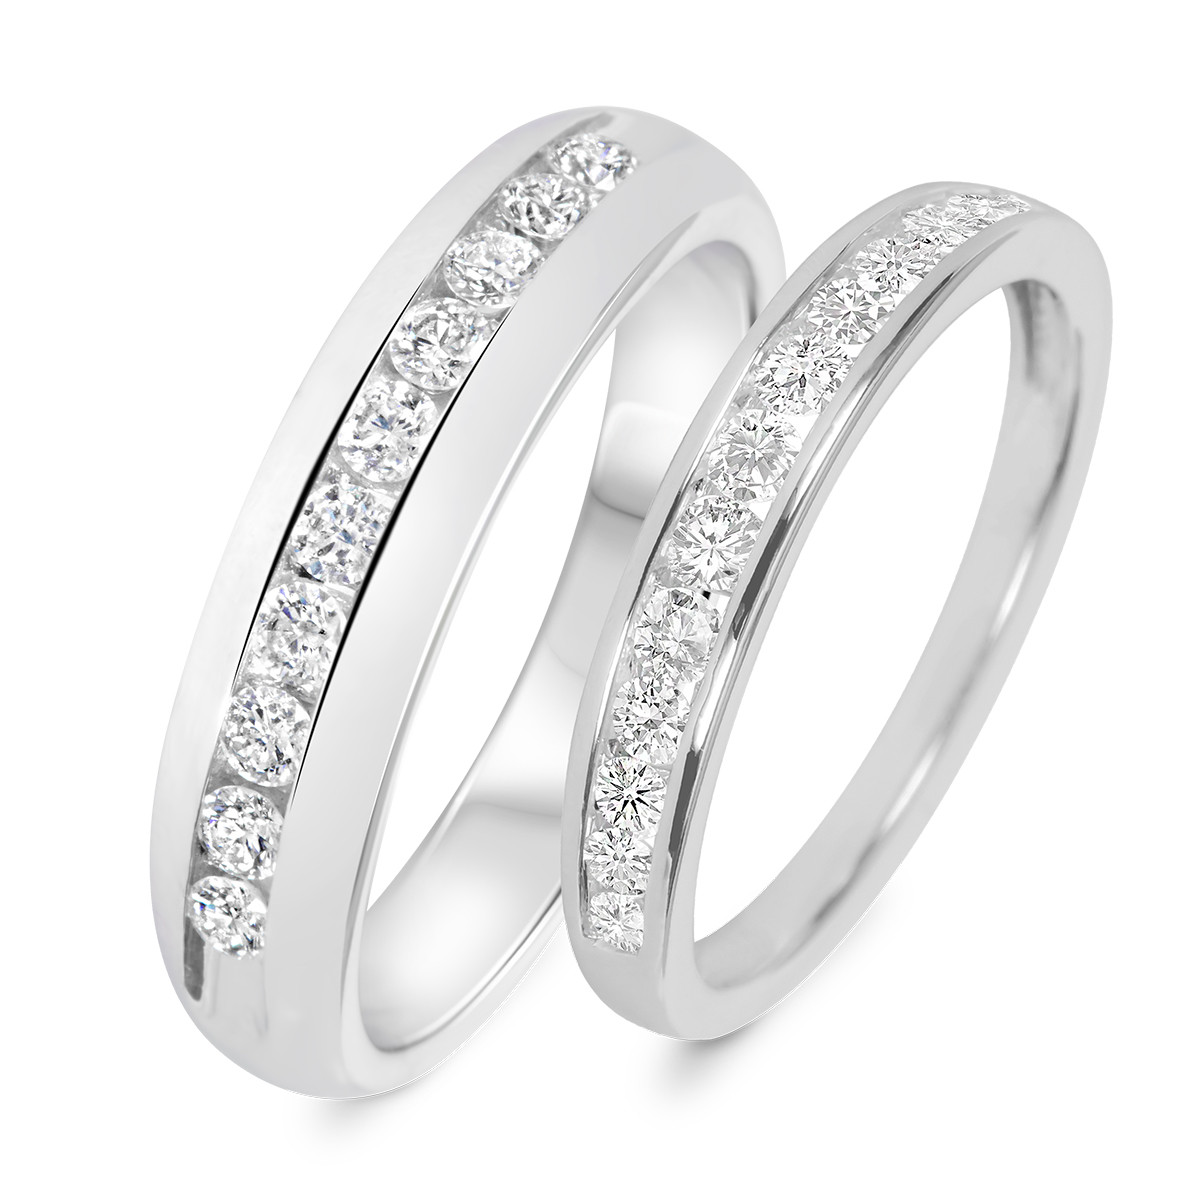 His And Hers Wedding Band Sets
 7 8 Carat T W Diamond His And Hers Wedding Band Set 14K